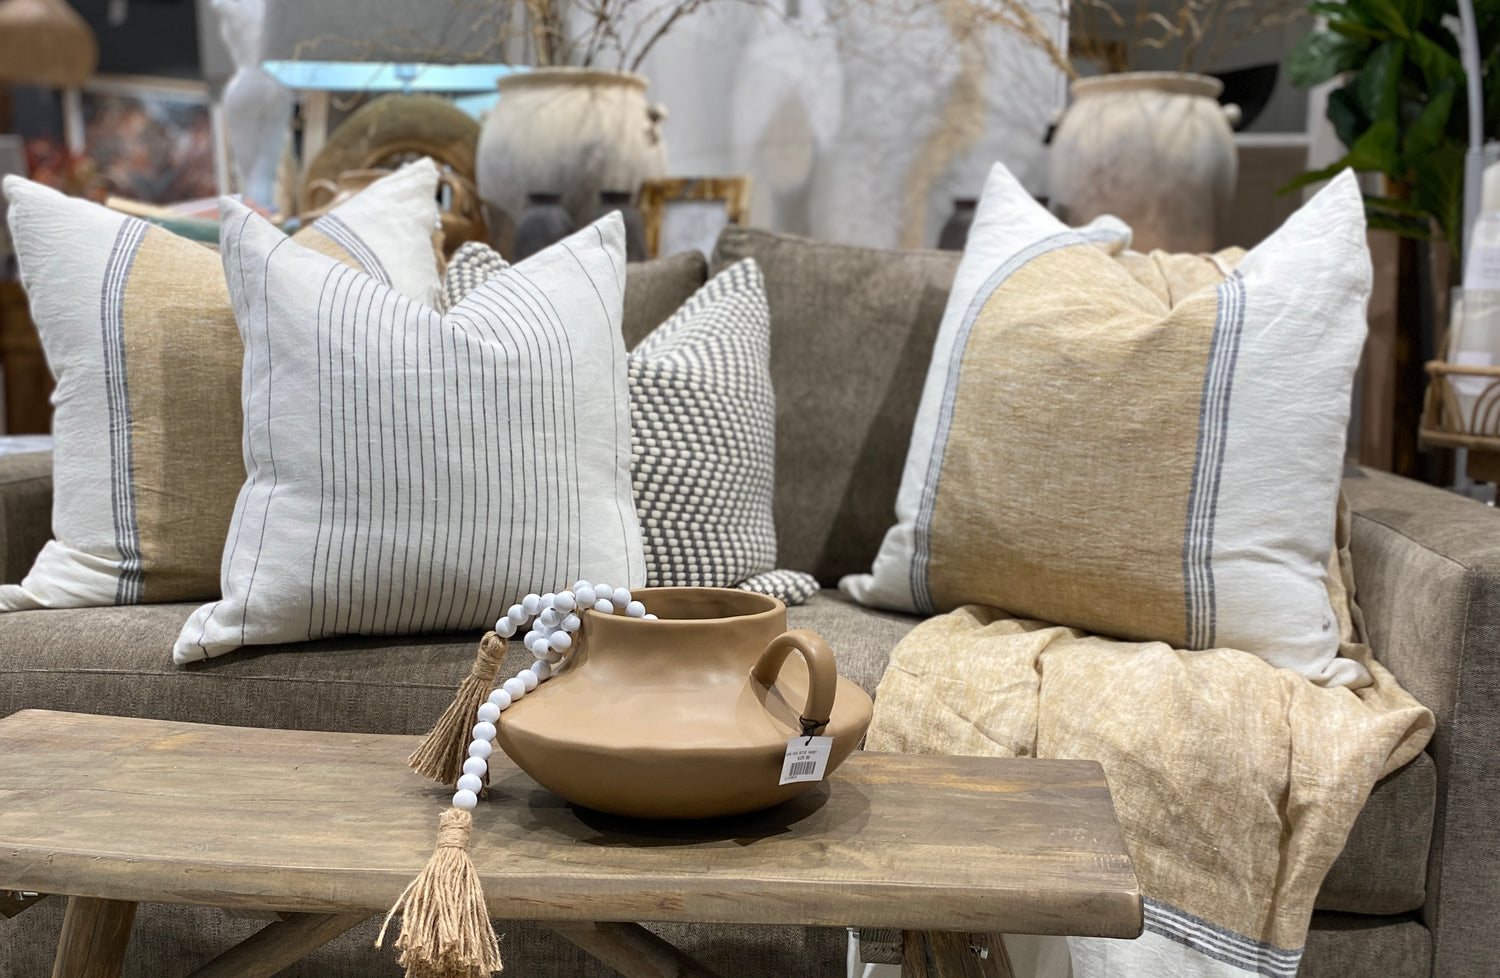 Shop our beautiful range of curated homewares available instore at Eastland Shopping Centre and now from the comfort of your own home through our online store.